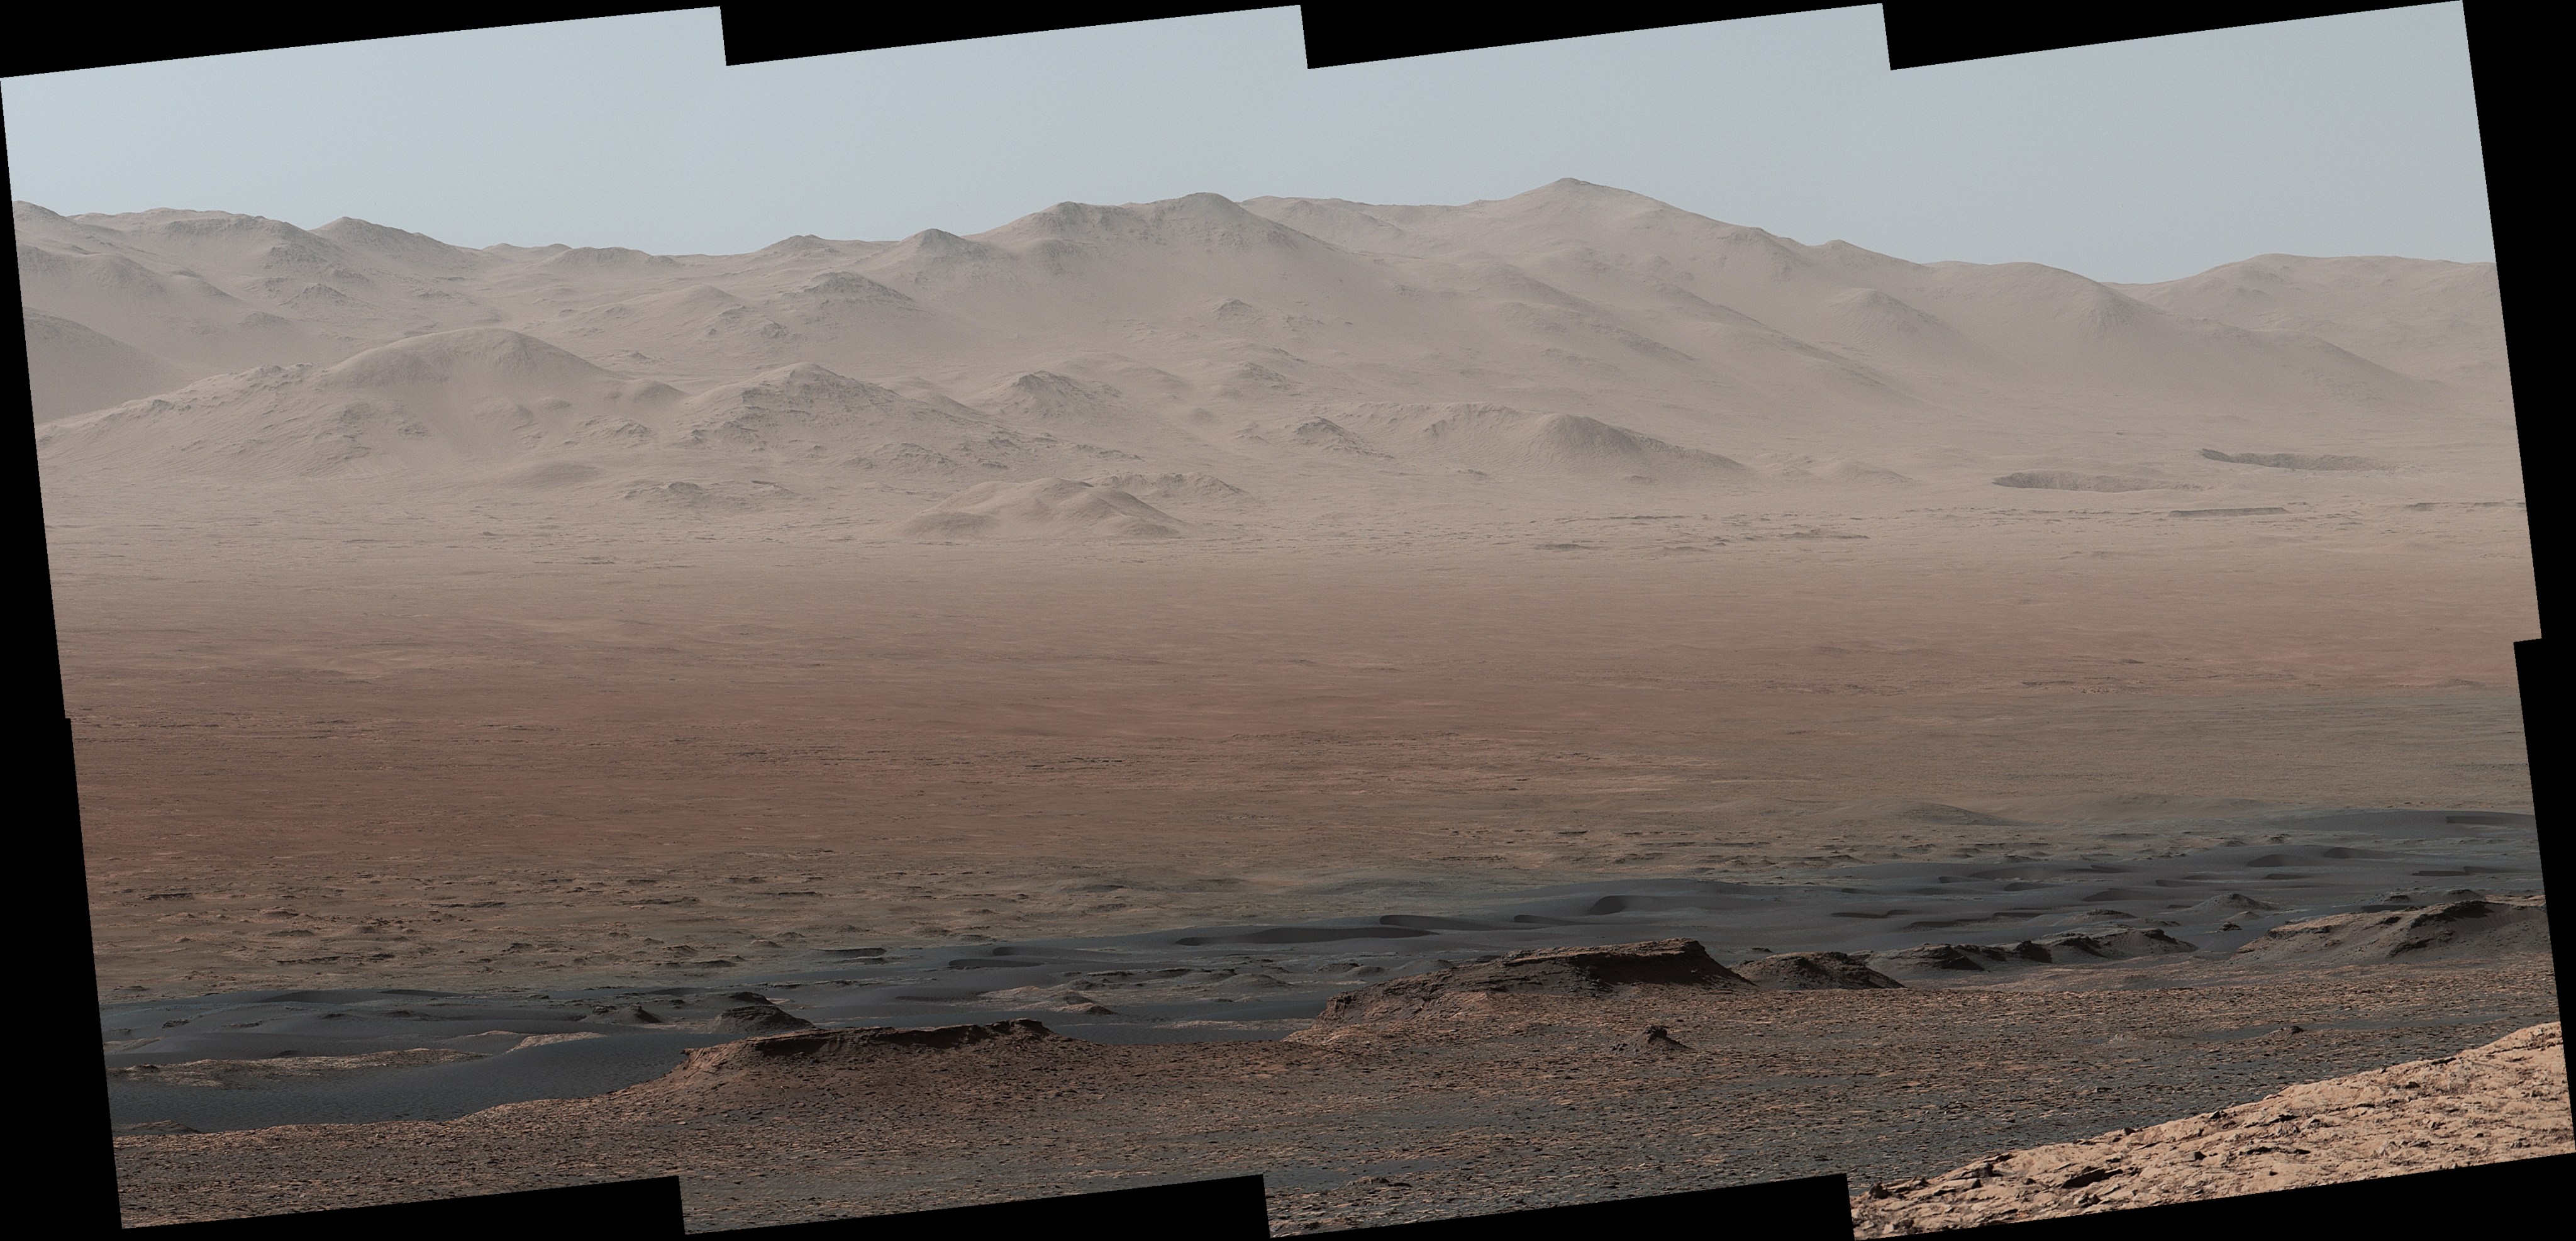 A viewpoint on "Vera Rubin Ridge" provided NASA's Curiosity Mars rover this detailed look back over the area where it began its mission inside Gale Crater, plus more-distant features of the crater. The right-eye, telephoto-lens camera of the rover's Mastcam took the component images Oct. 25, 2017.